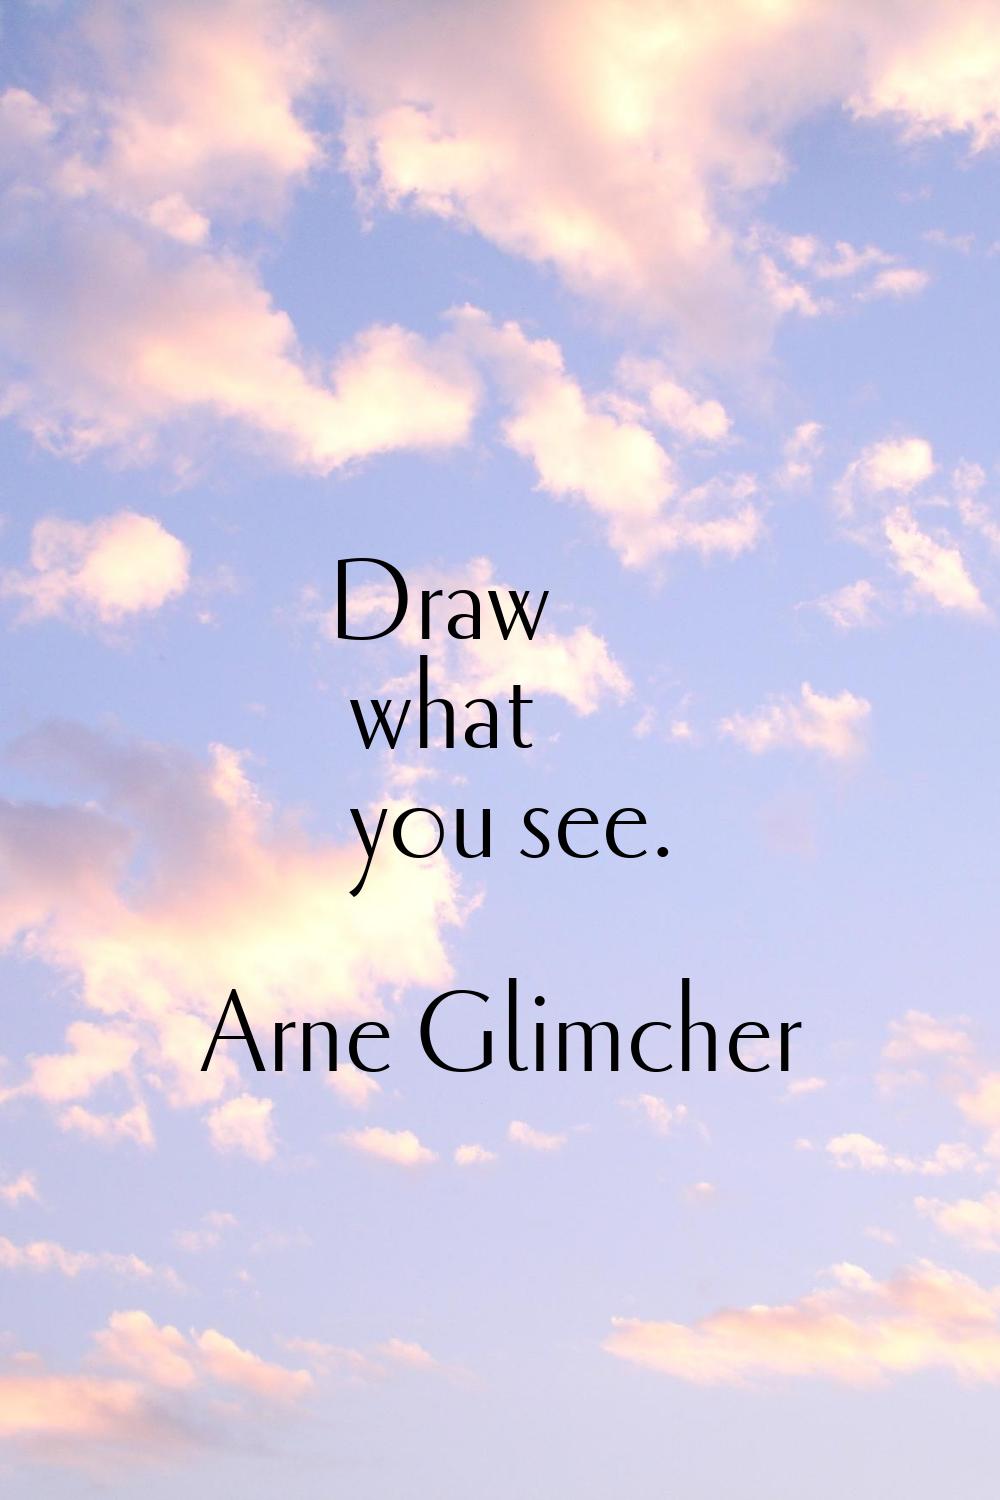 Draw what you see.